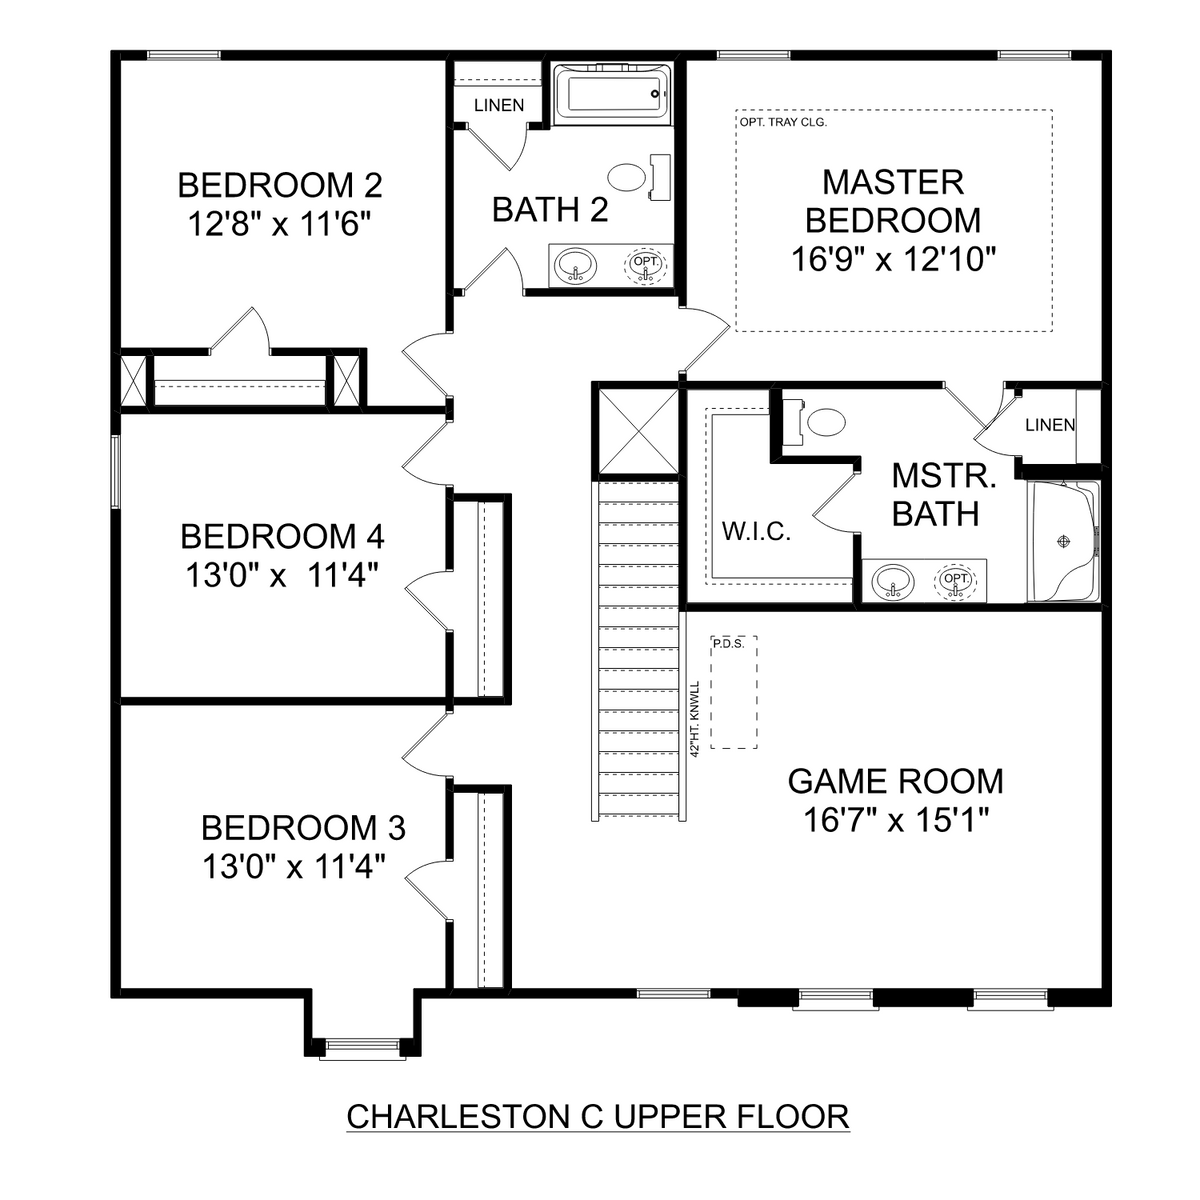 2 - The Charleston C floor plan layout for 132 Heritage Lakes Boulevard in Davidson Homes' Heritage Lakes community.